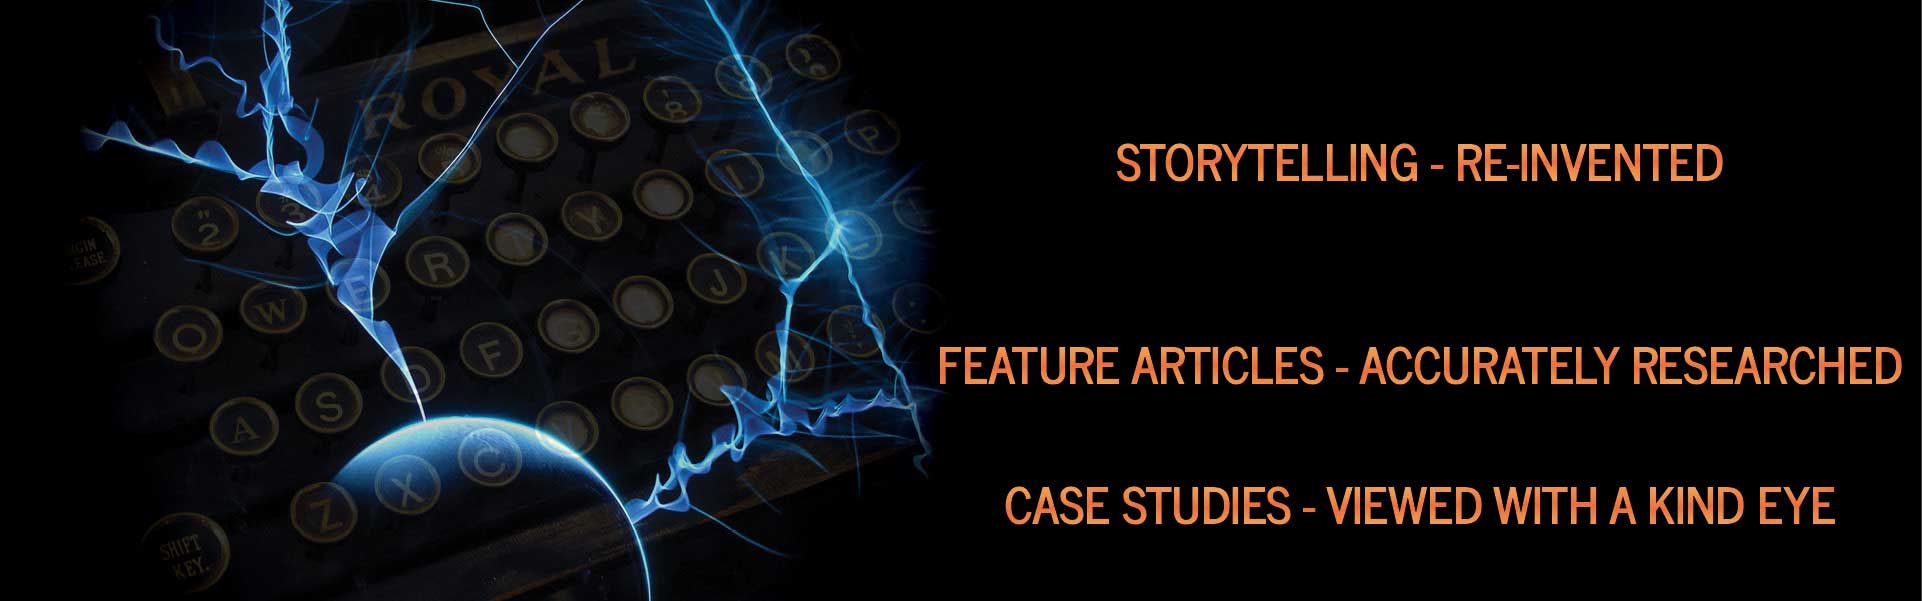 Storytelling re-invented - Feature articles accurately researched - Case studies viewed with a kind eye